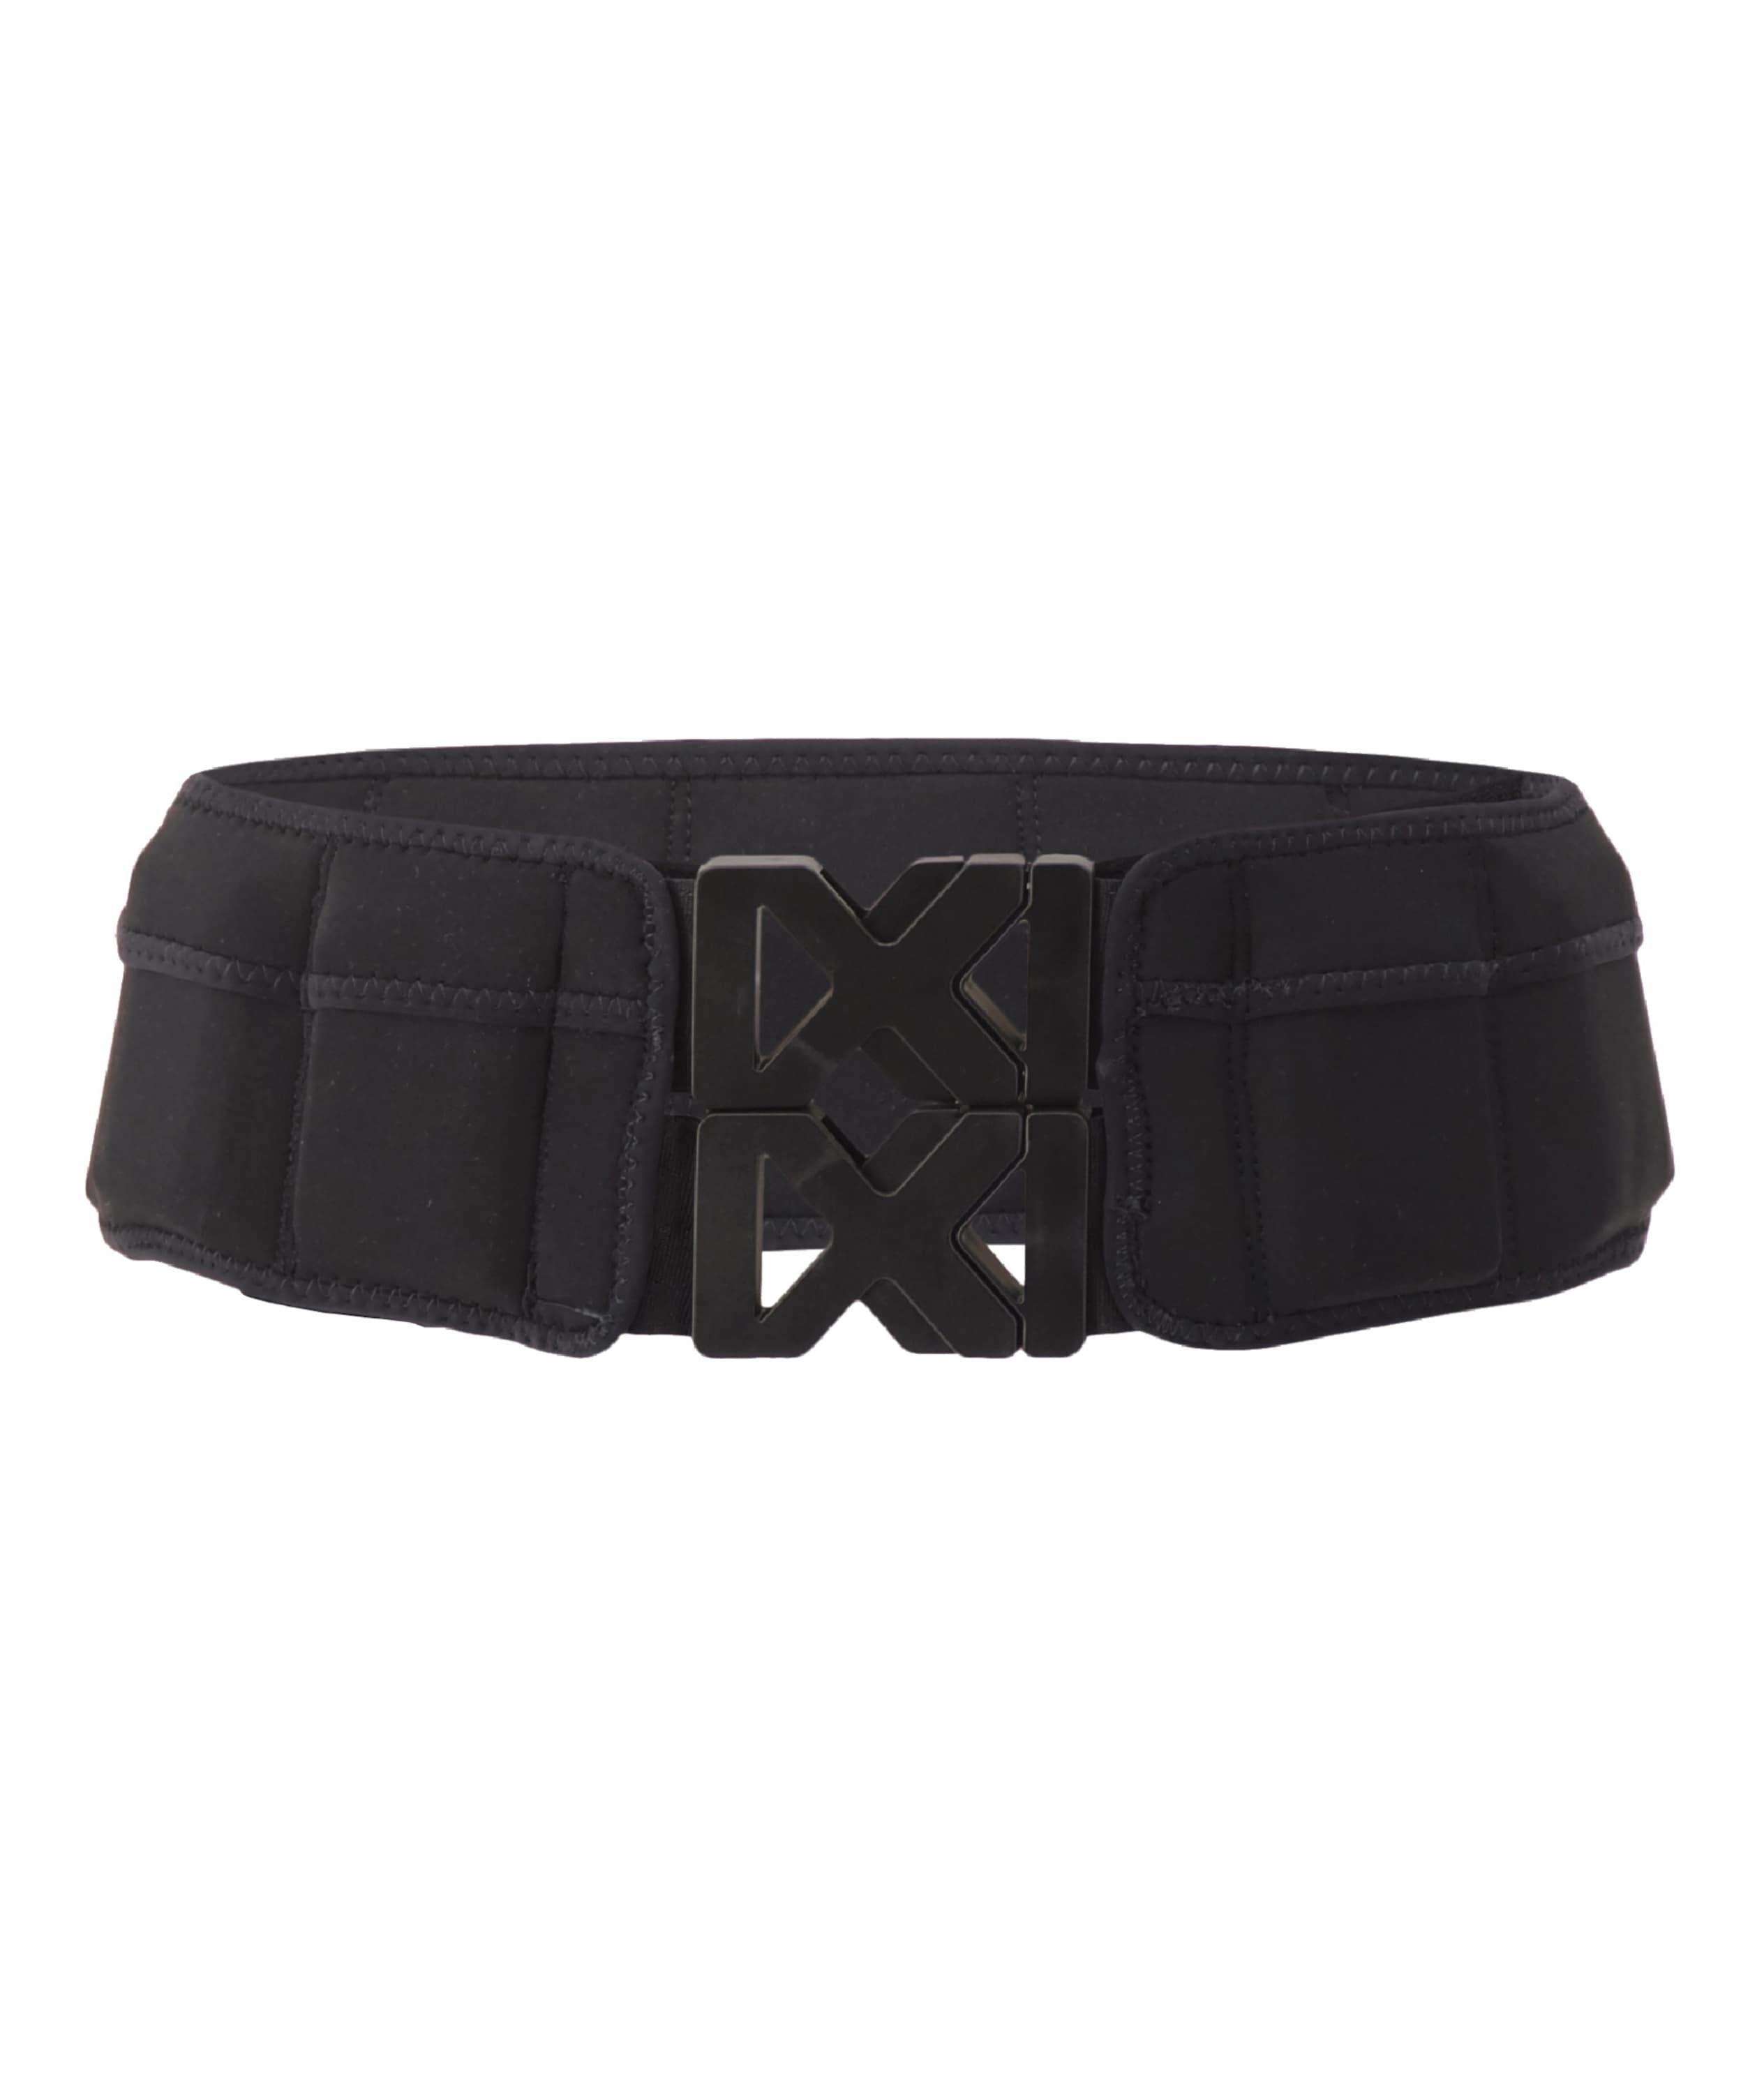 Power Weighted Fitness Belt image 0